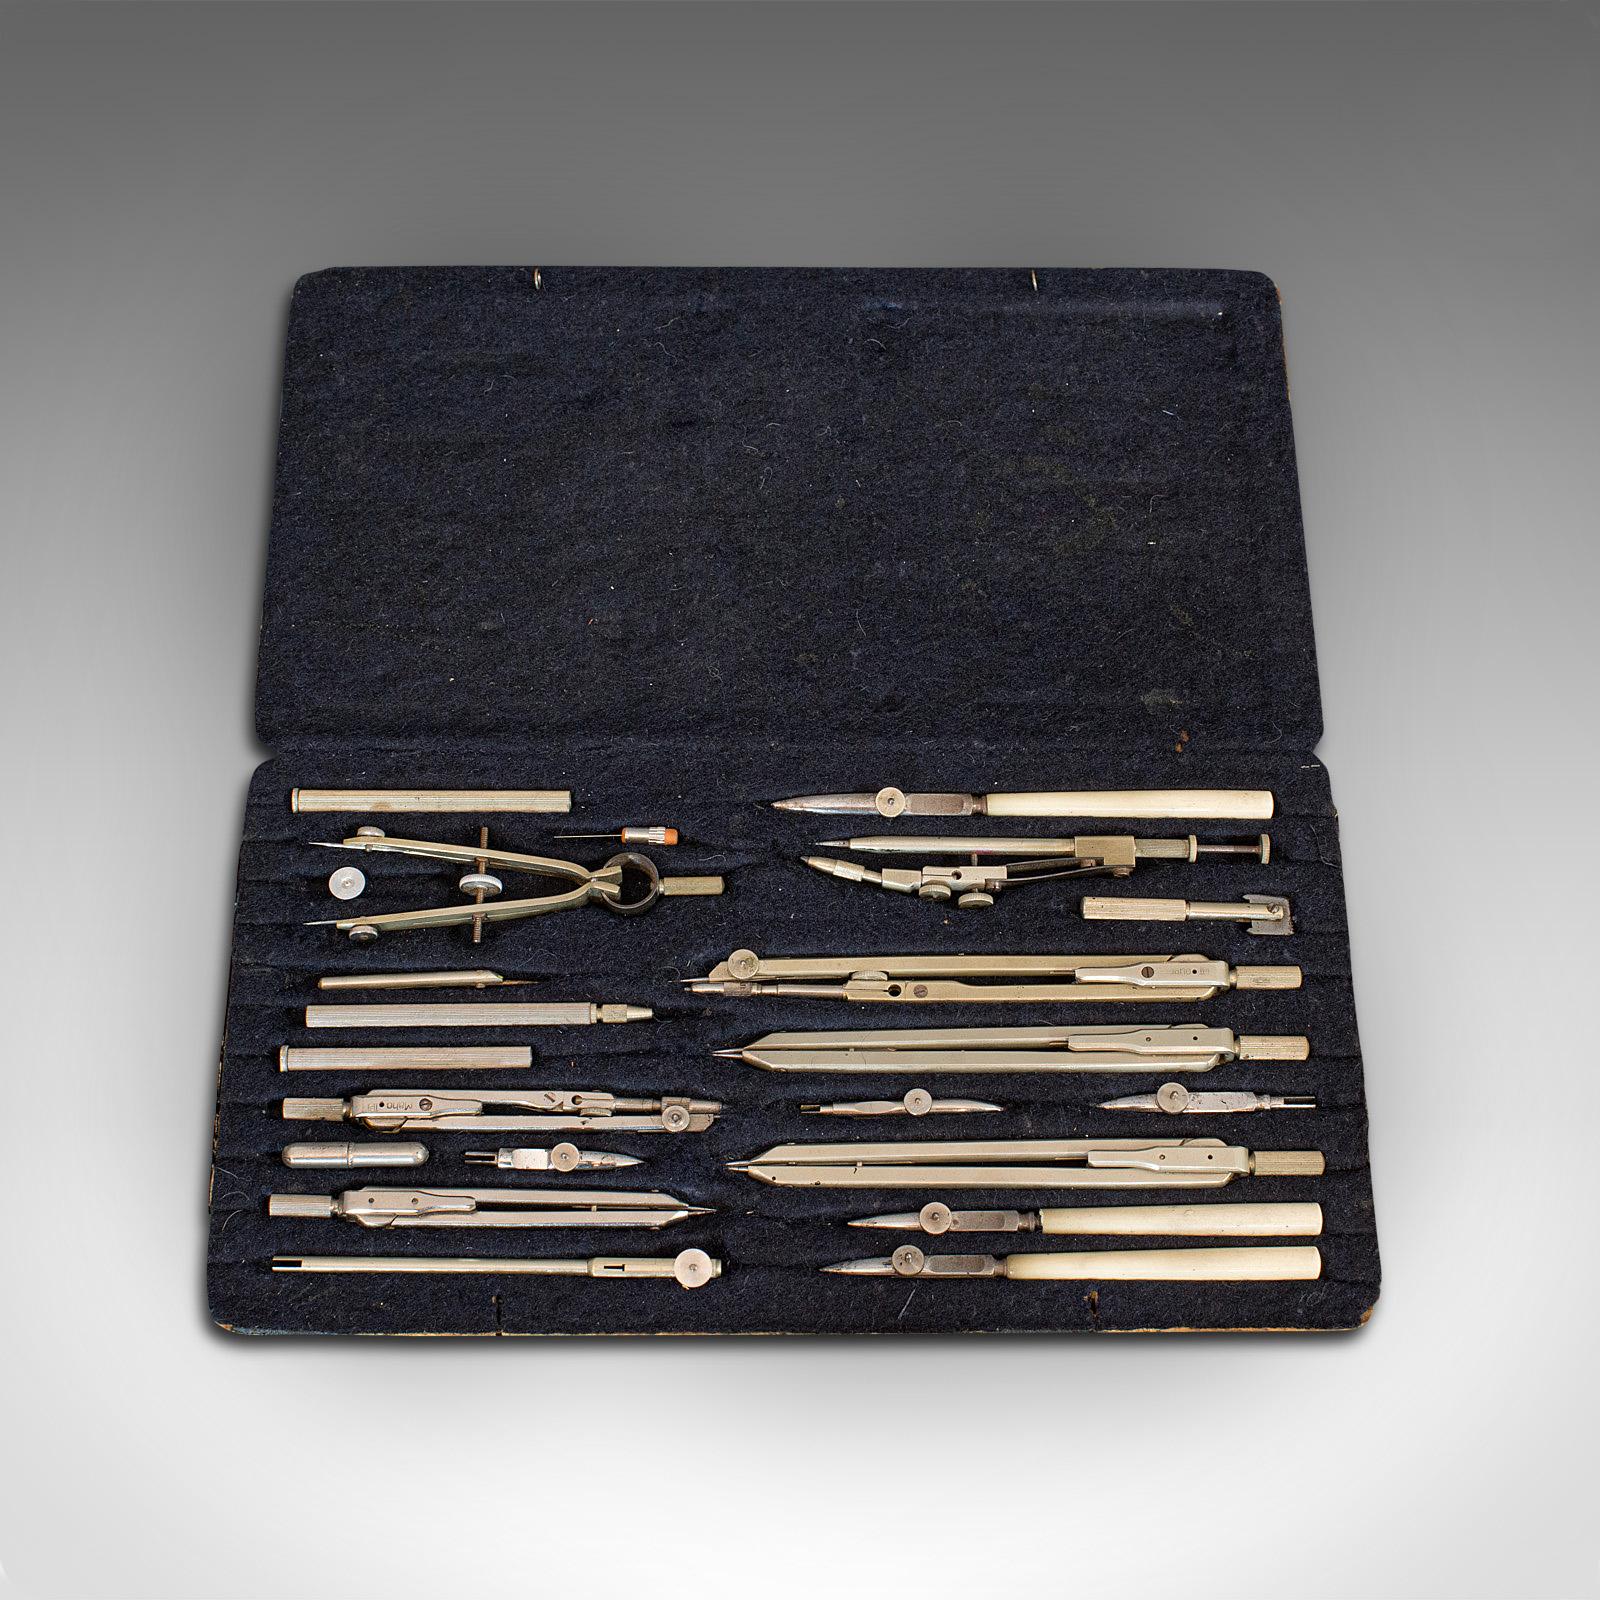 This is an antique draughtsman's instrument set. A German, silver nickel technical drawing case by Maho Prazision, dating to the Edwardian period, circa 1910.

Superb, comprehensive set of German instruments
Displaying a desirable aged